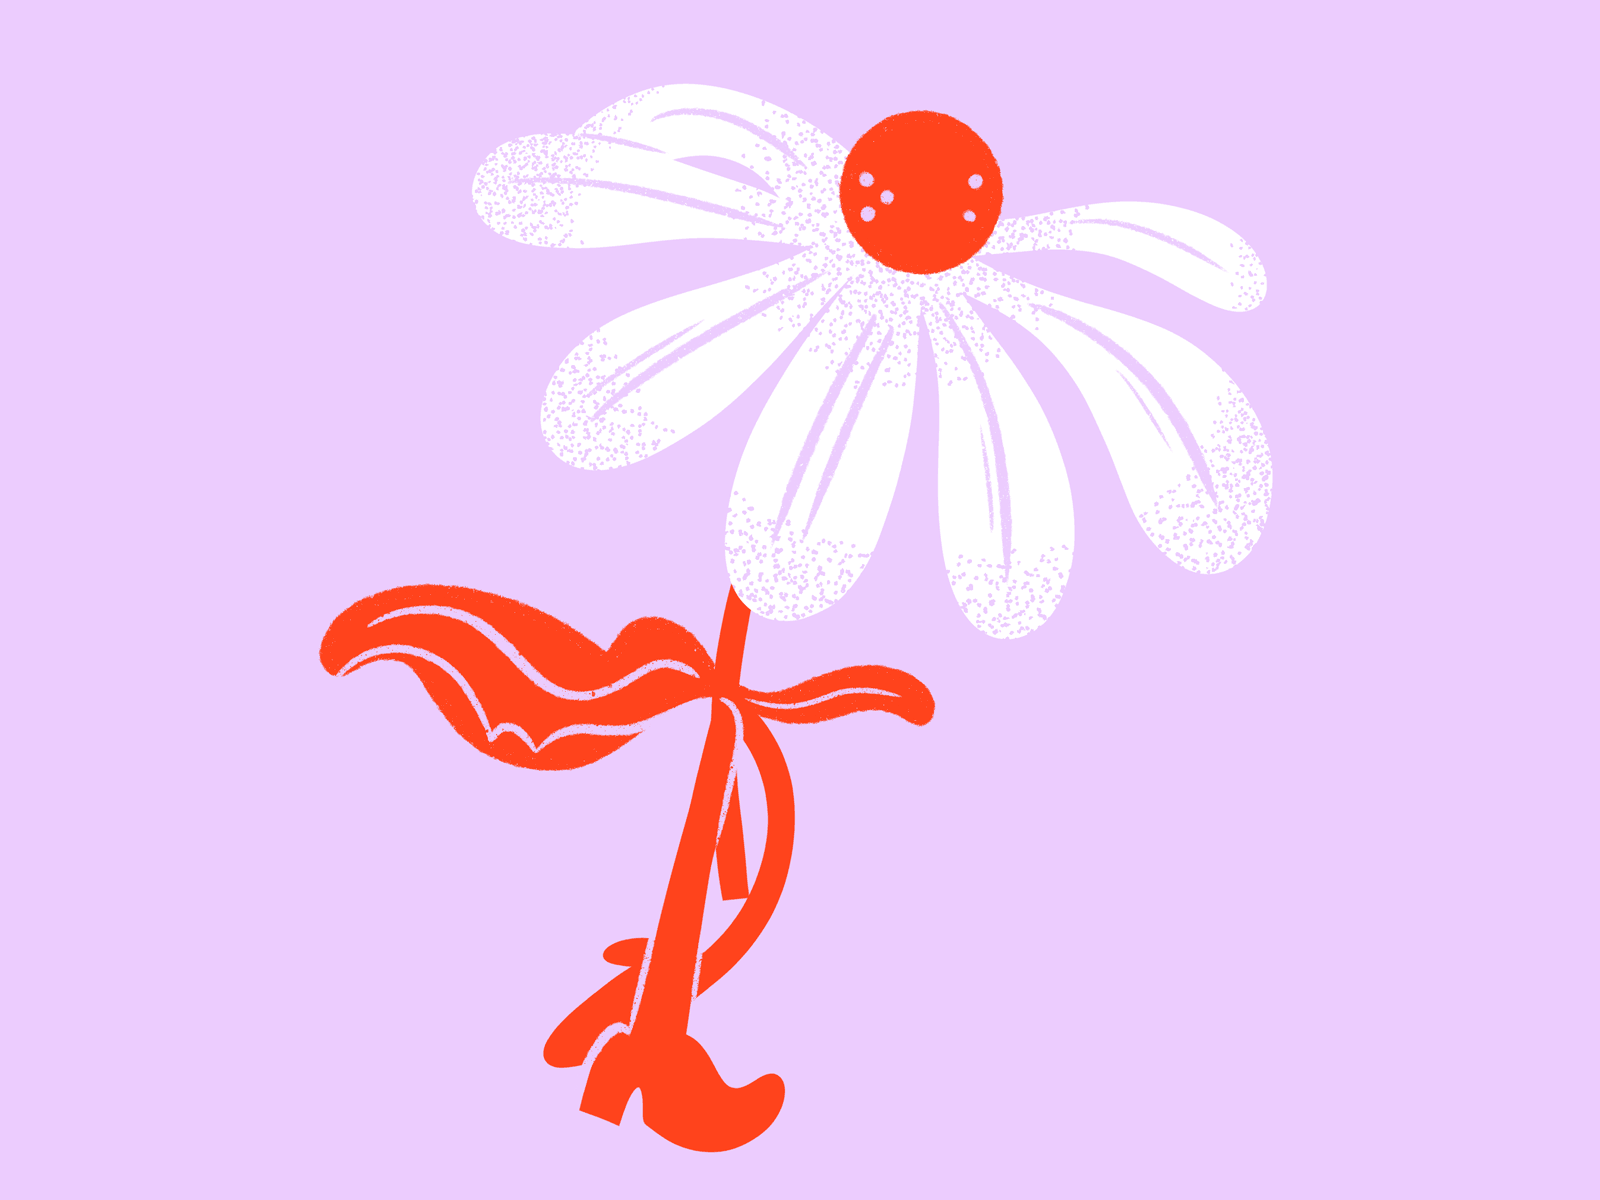 Daisy Walk animate animated loop animation bright daisy drawing flower frame for frame illustration jordan kay limited color noise stippling stop motion texture walk walk cycle walk sequence